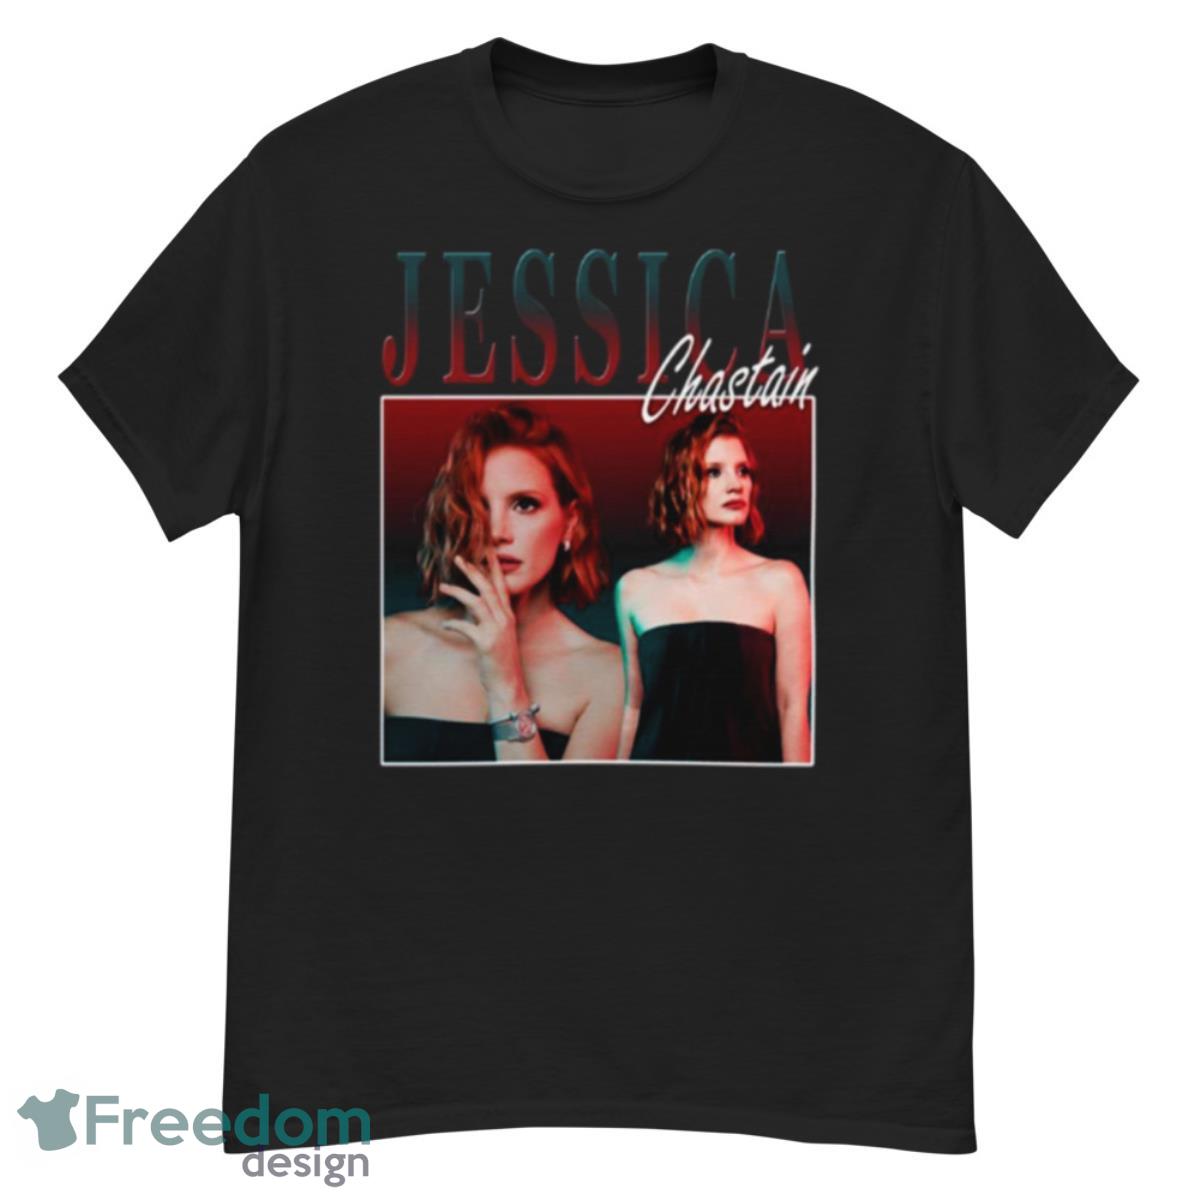 Collage Jessica Chastain Homage Actress shirt - G500 Men’s Classic T-Shirt